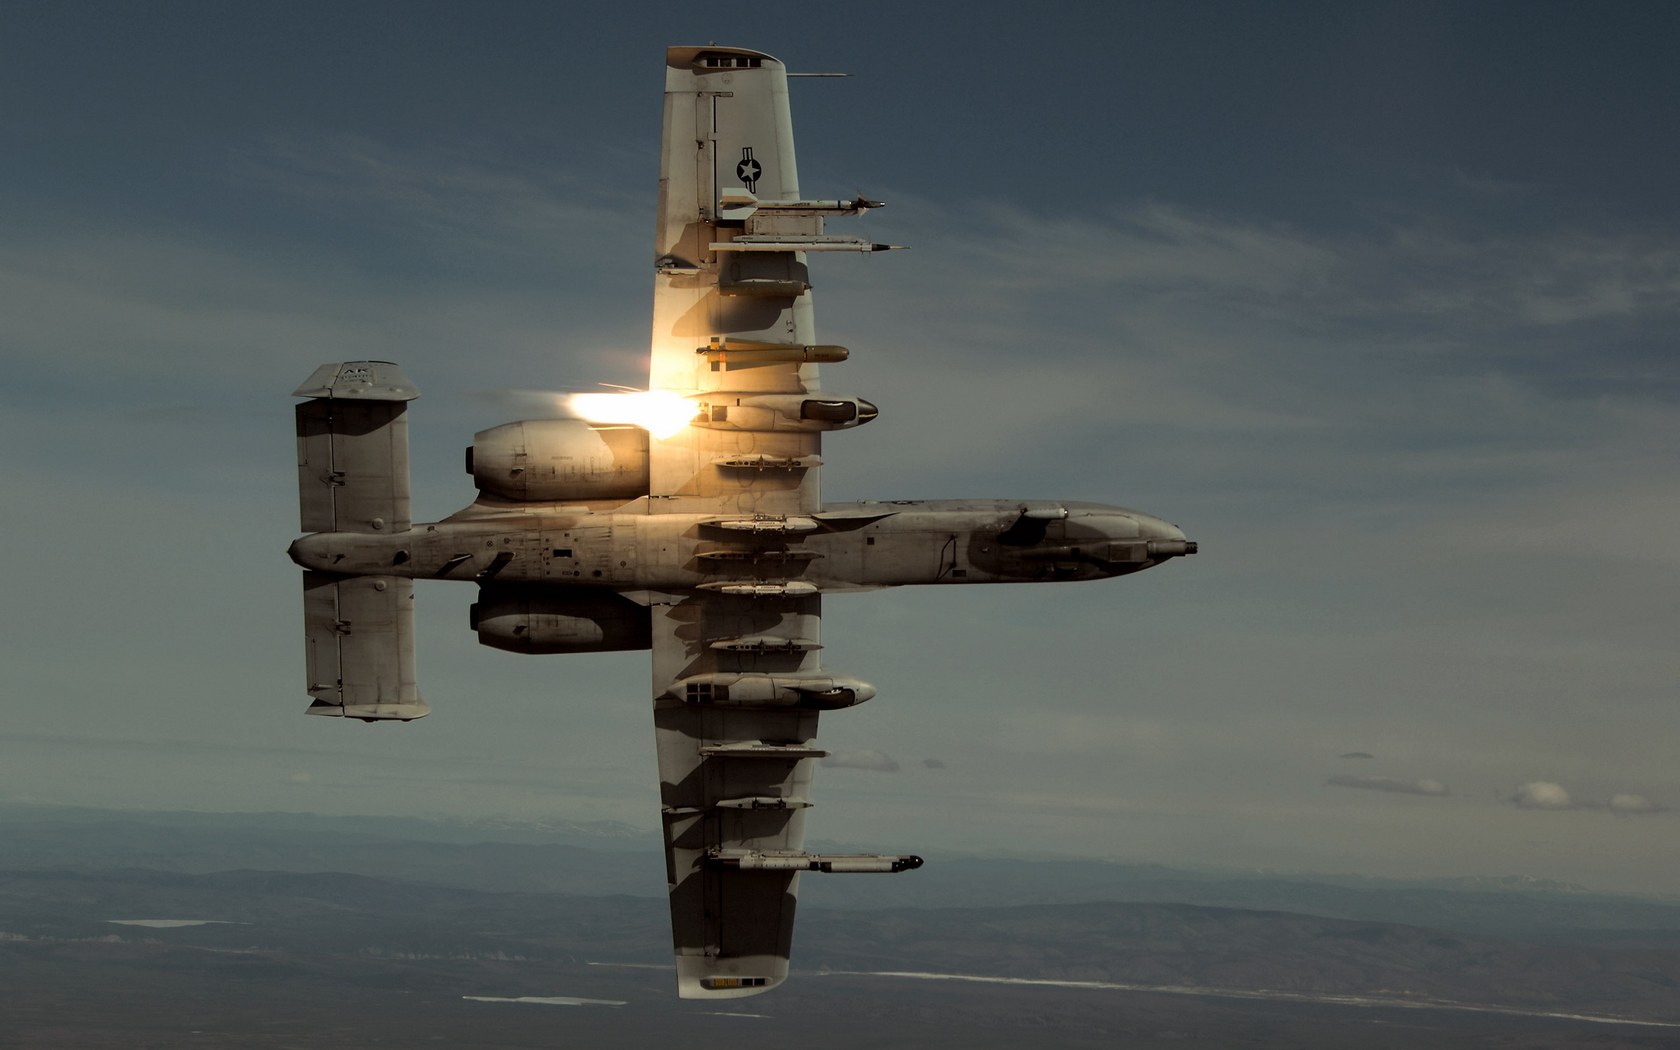 Download HQ A-10 Thunderbolt Military Airplanes wallpaper / 1680x1050